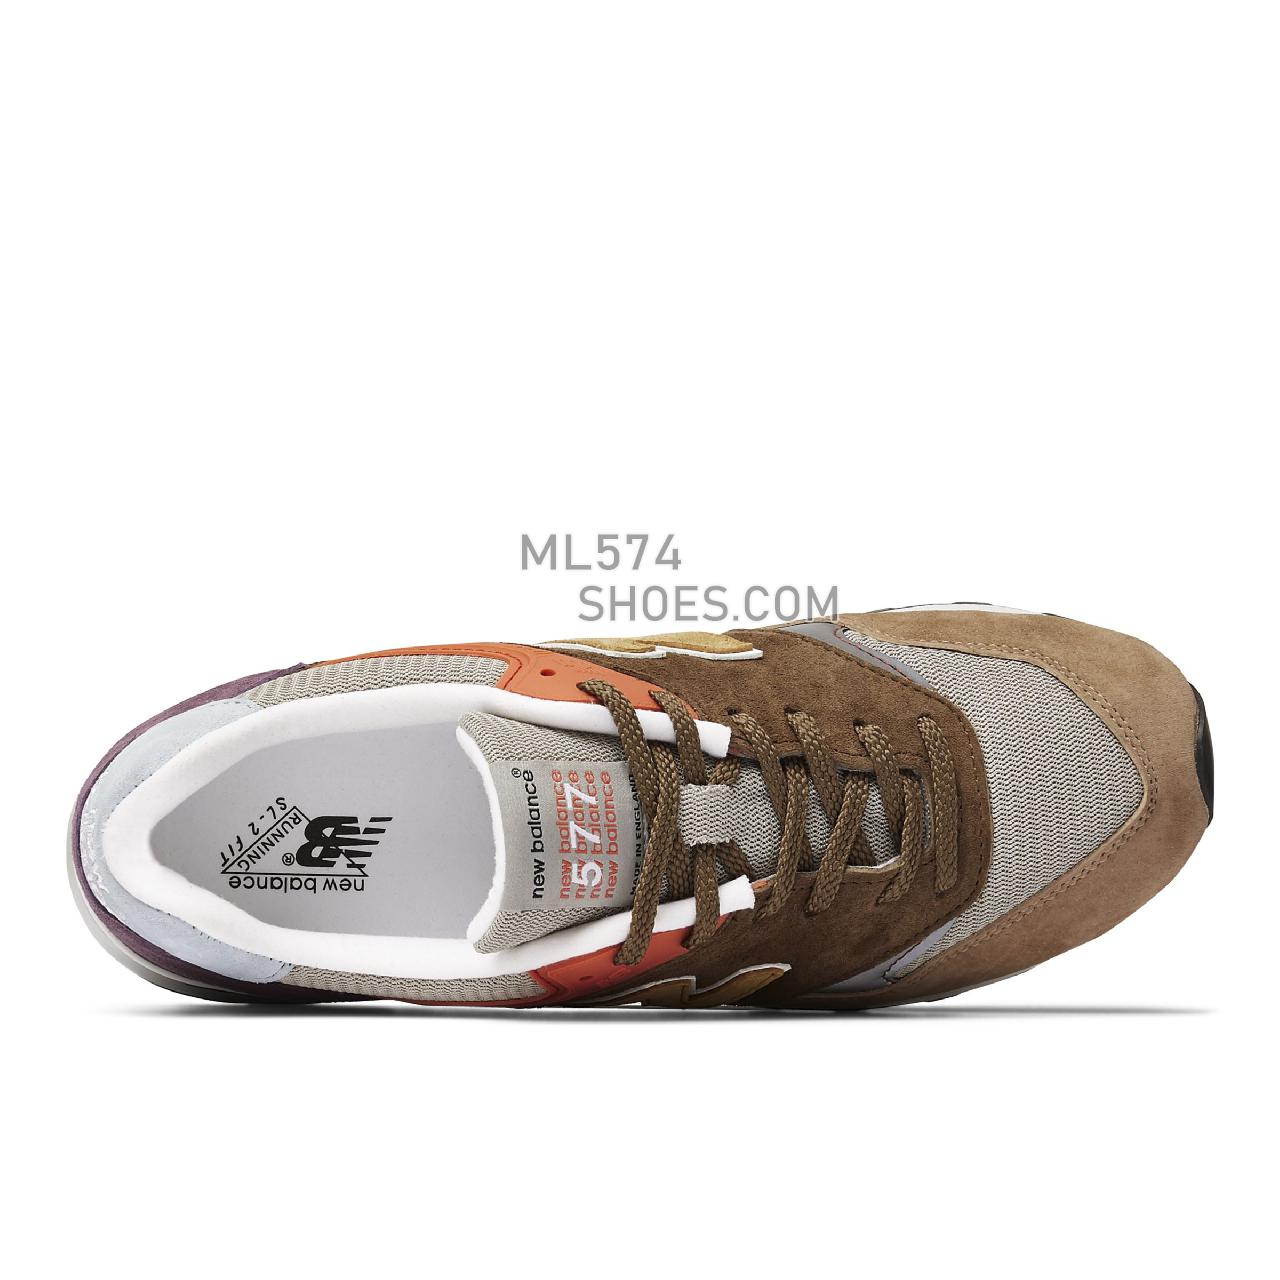 New Balance Made in UK 577 - Men's Made in USA And UK Sneakers - Sand with grey and salmon - M577DS